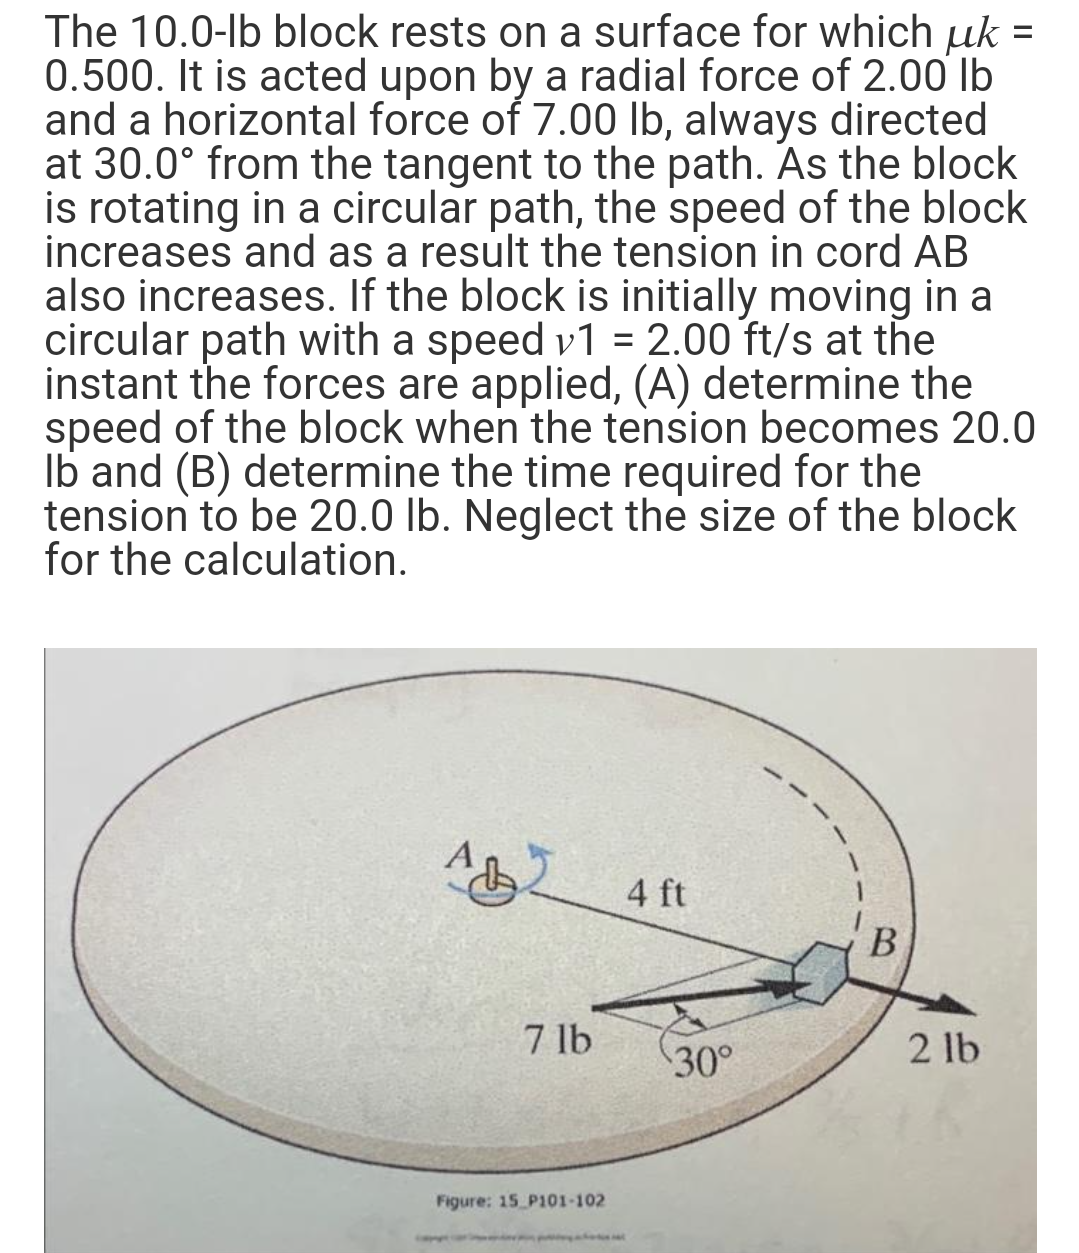 The 10.0-lb block rests on a surface for which µk =
0.500. It is acted upon by a radial force of 2.00 lb
and a horizontal force of 7.00 lb, always directed
at 30.0° from the tangent to the path. As the block
is rotating in a circular path, the speed of the block
increases and as a result the tension in cord AB
also increases. If the block is initially moving in a
circular path with a speed v1 = 2.00 ft/s at the
instant the forces are applied, (A) determine the
speed of the block when the tension becomes 20.0
Ib and (B) determine the time required for the
tension to be 20.0 lb. Neglect the size of the block
for the calculation.
4 ft
В
7 lb
30°
2 lb
Figure: 15 P101-102
ww nd
